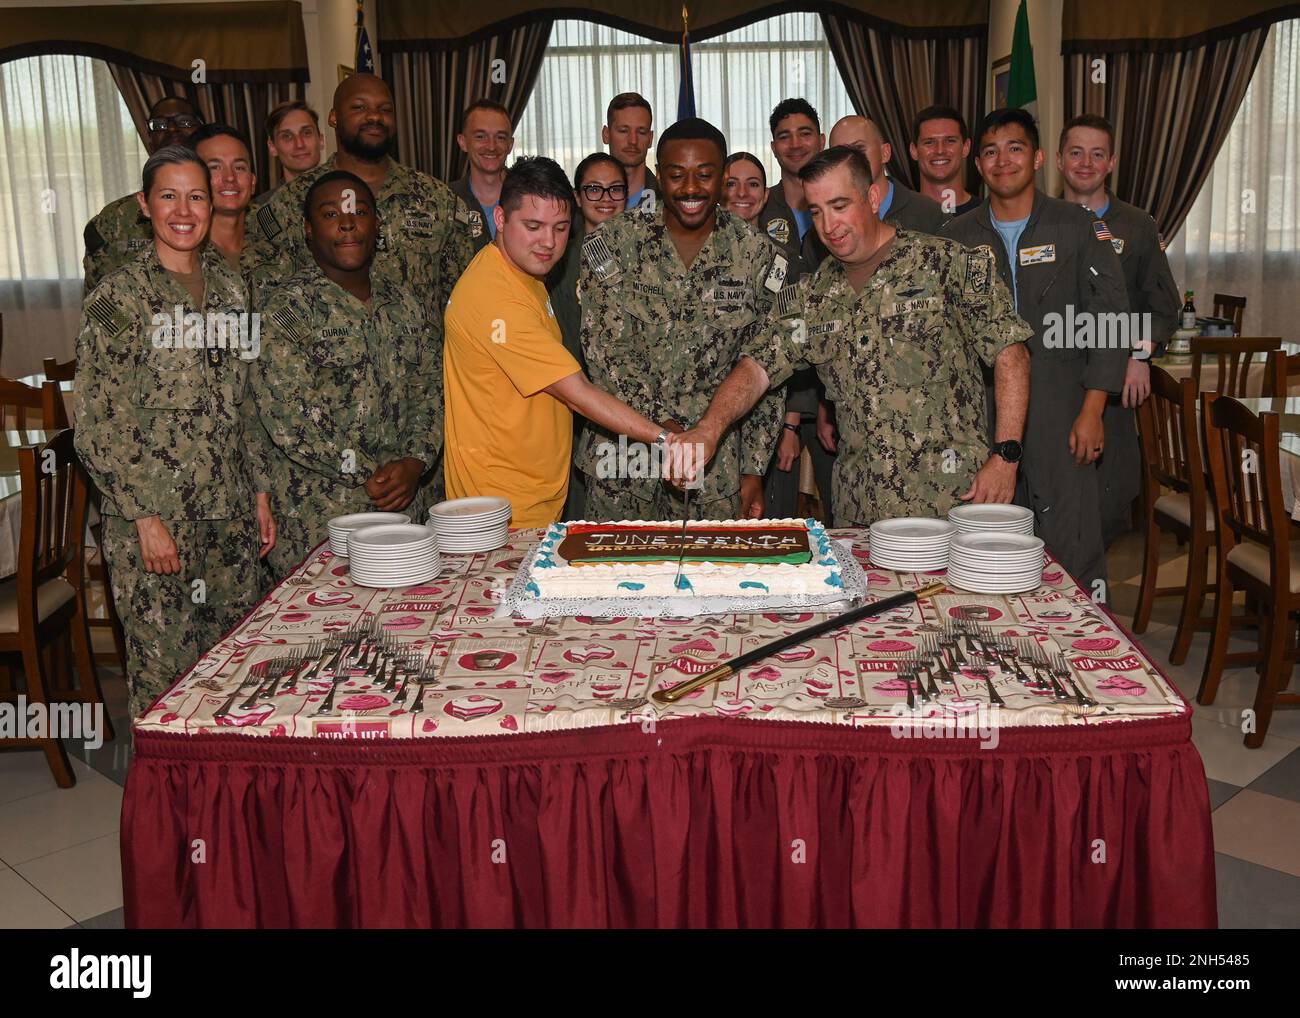 220621-N-GK686-1016 NAVAL AIR STATION SIGONELLA, Italy (June 21, 2022)  Cmdr. Ronald Cappellini, Naval Air Station Sigonella executive officer,  cuts a cake with Ristorante Bella Etna galley patrons in honor of  Juneteenth on